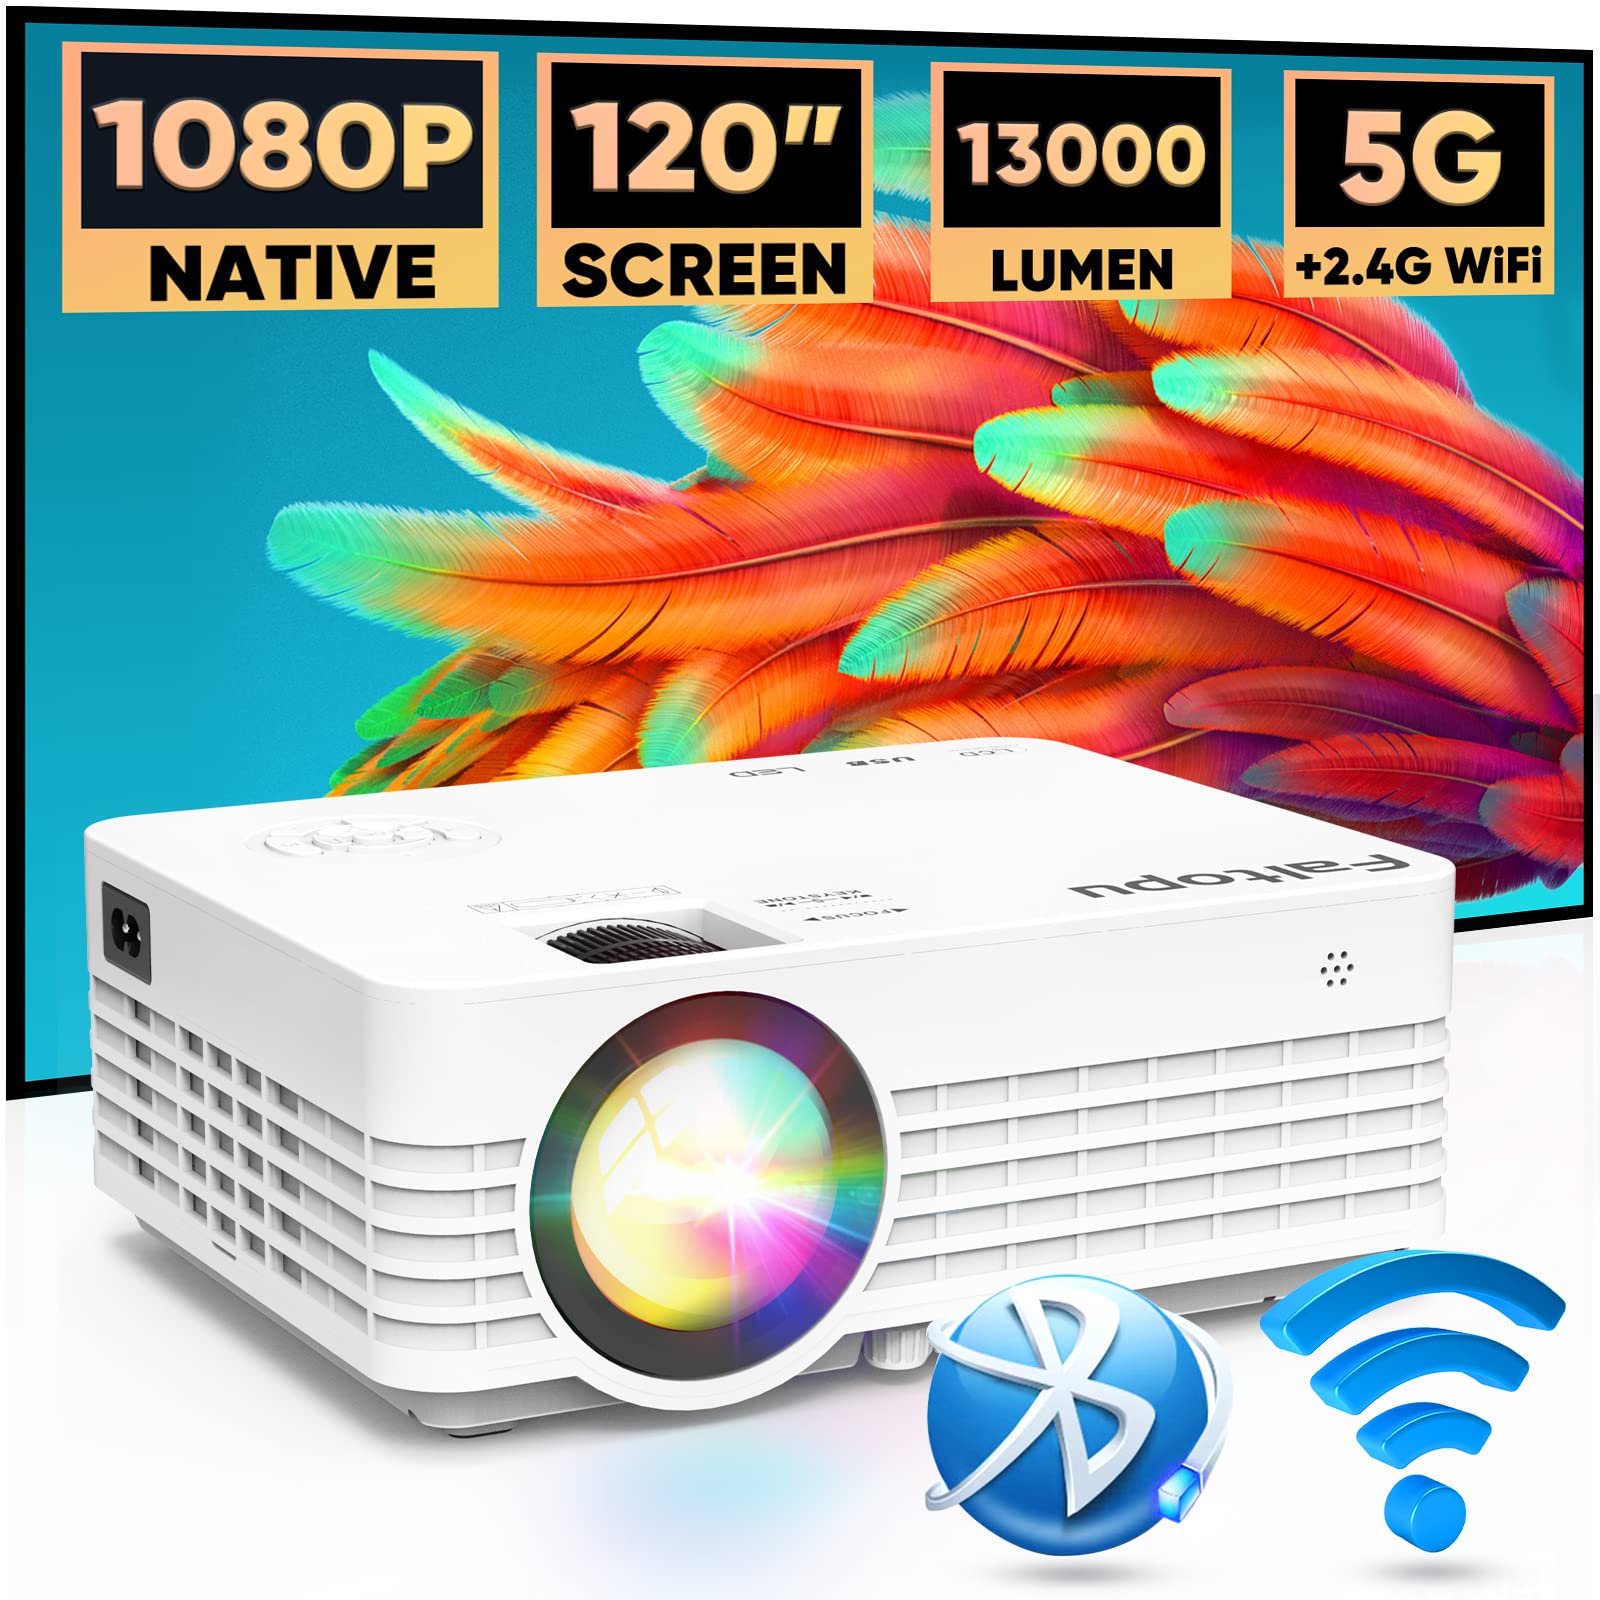 Faltopu Native 1080P Projector, Mini Portable【Projector with 120'' Screen】Movie Projector with 5G WiFi and Bluetooth, 13000L Full HD Outdoor Projector Compatible with iOS/Android,TV Stick,HDMI,USB